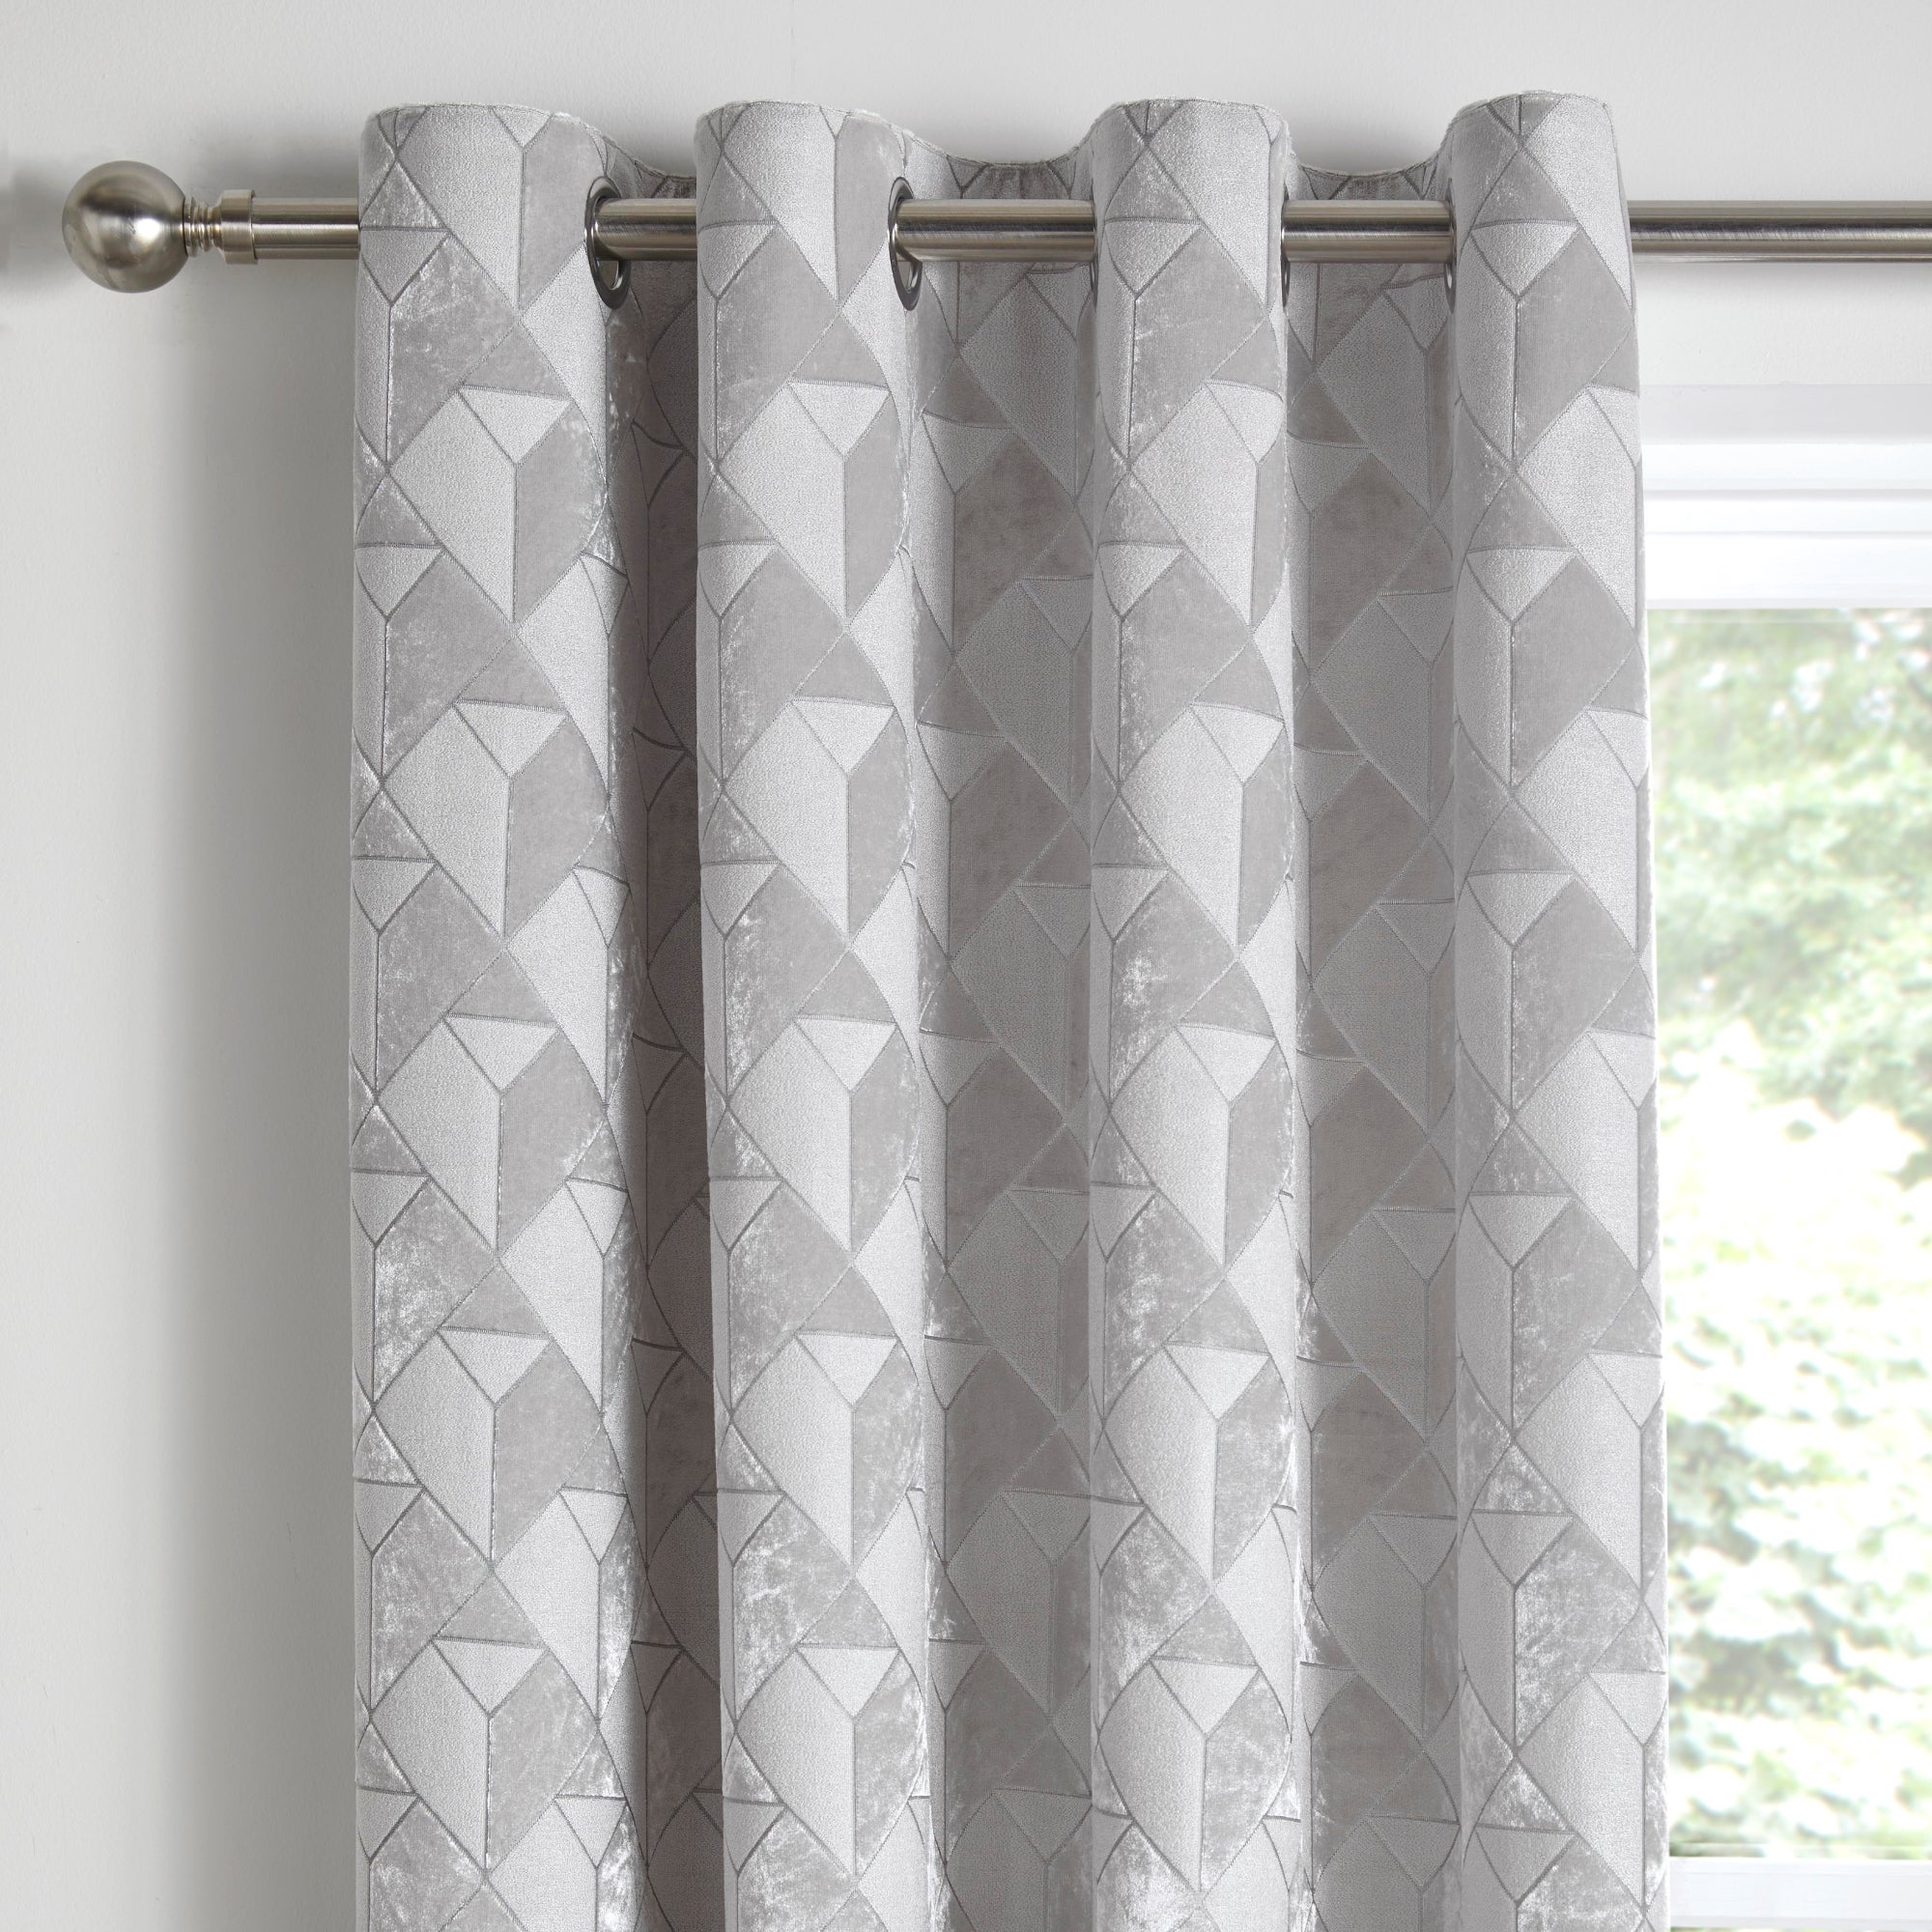 Appletree Boutique Quentin Jacquard Silver Eyelet Curtains | Dunelm